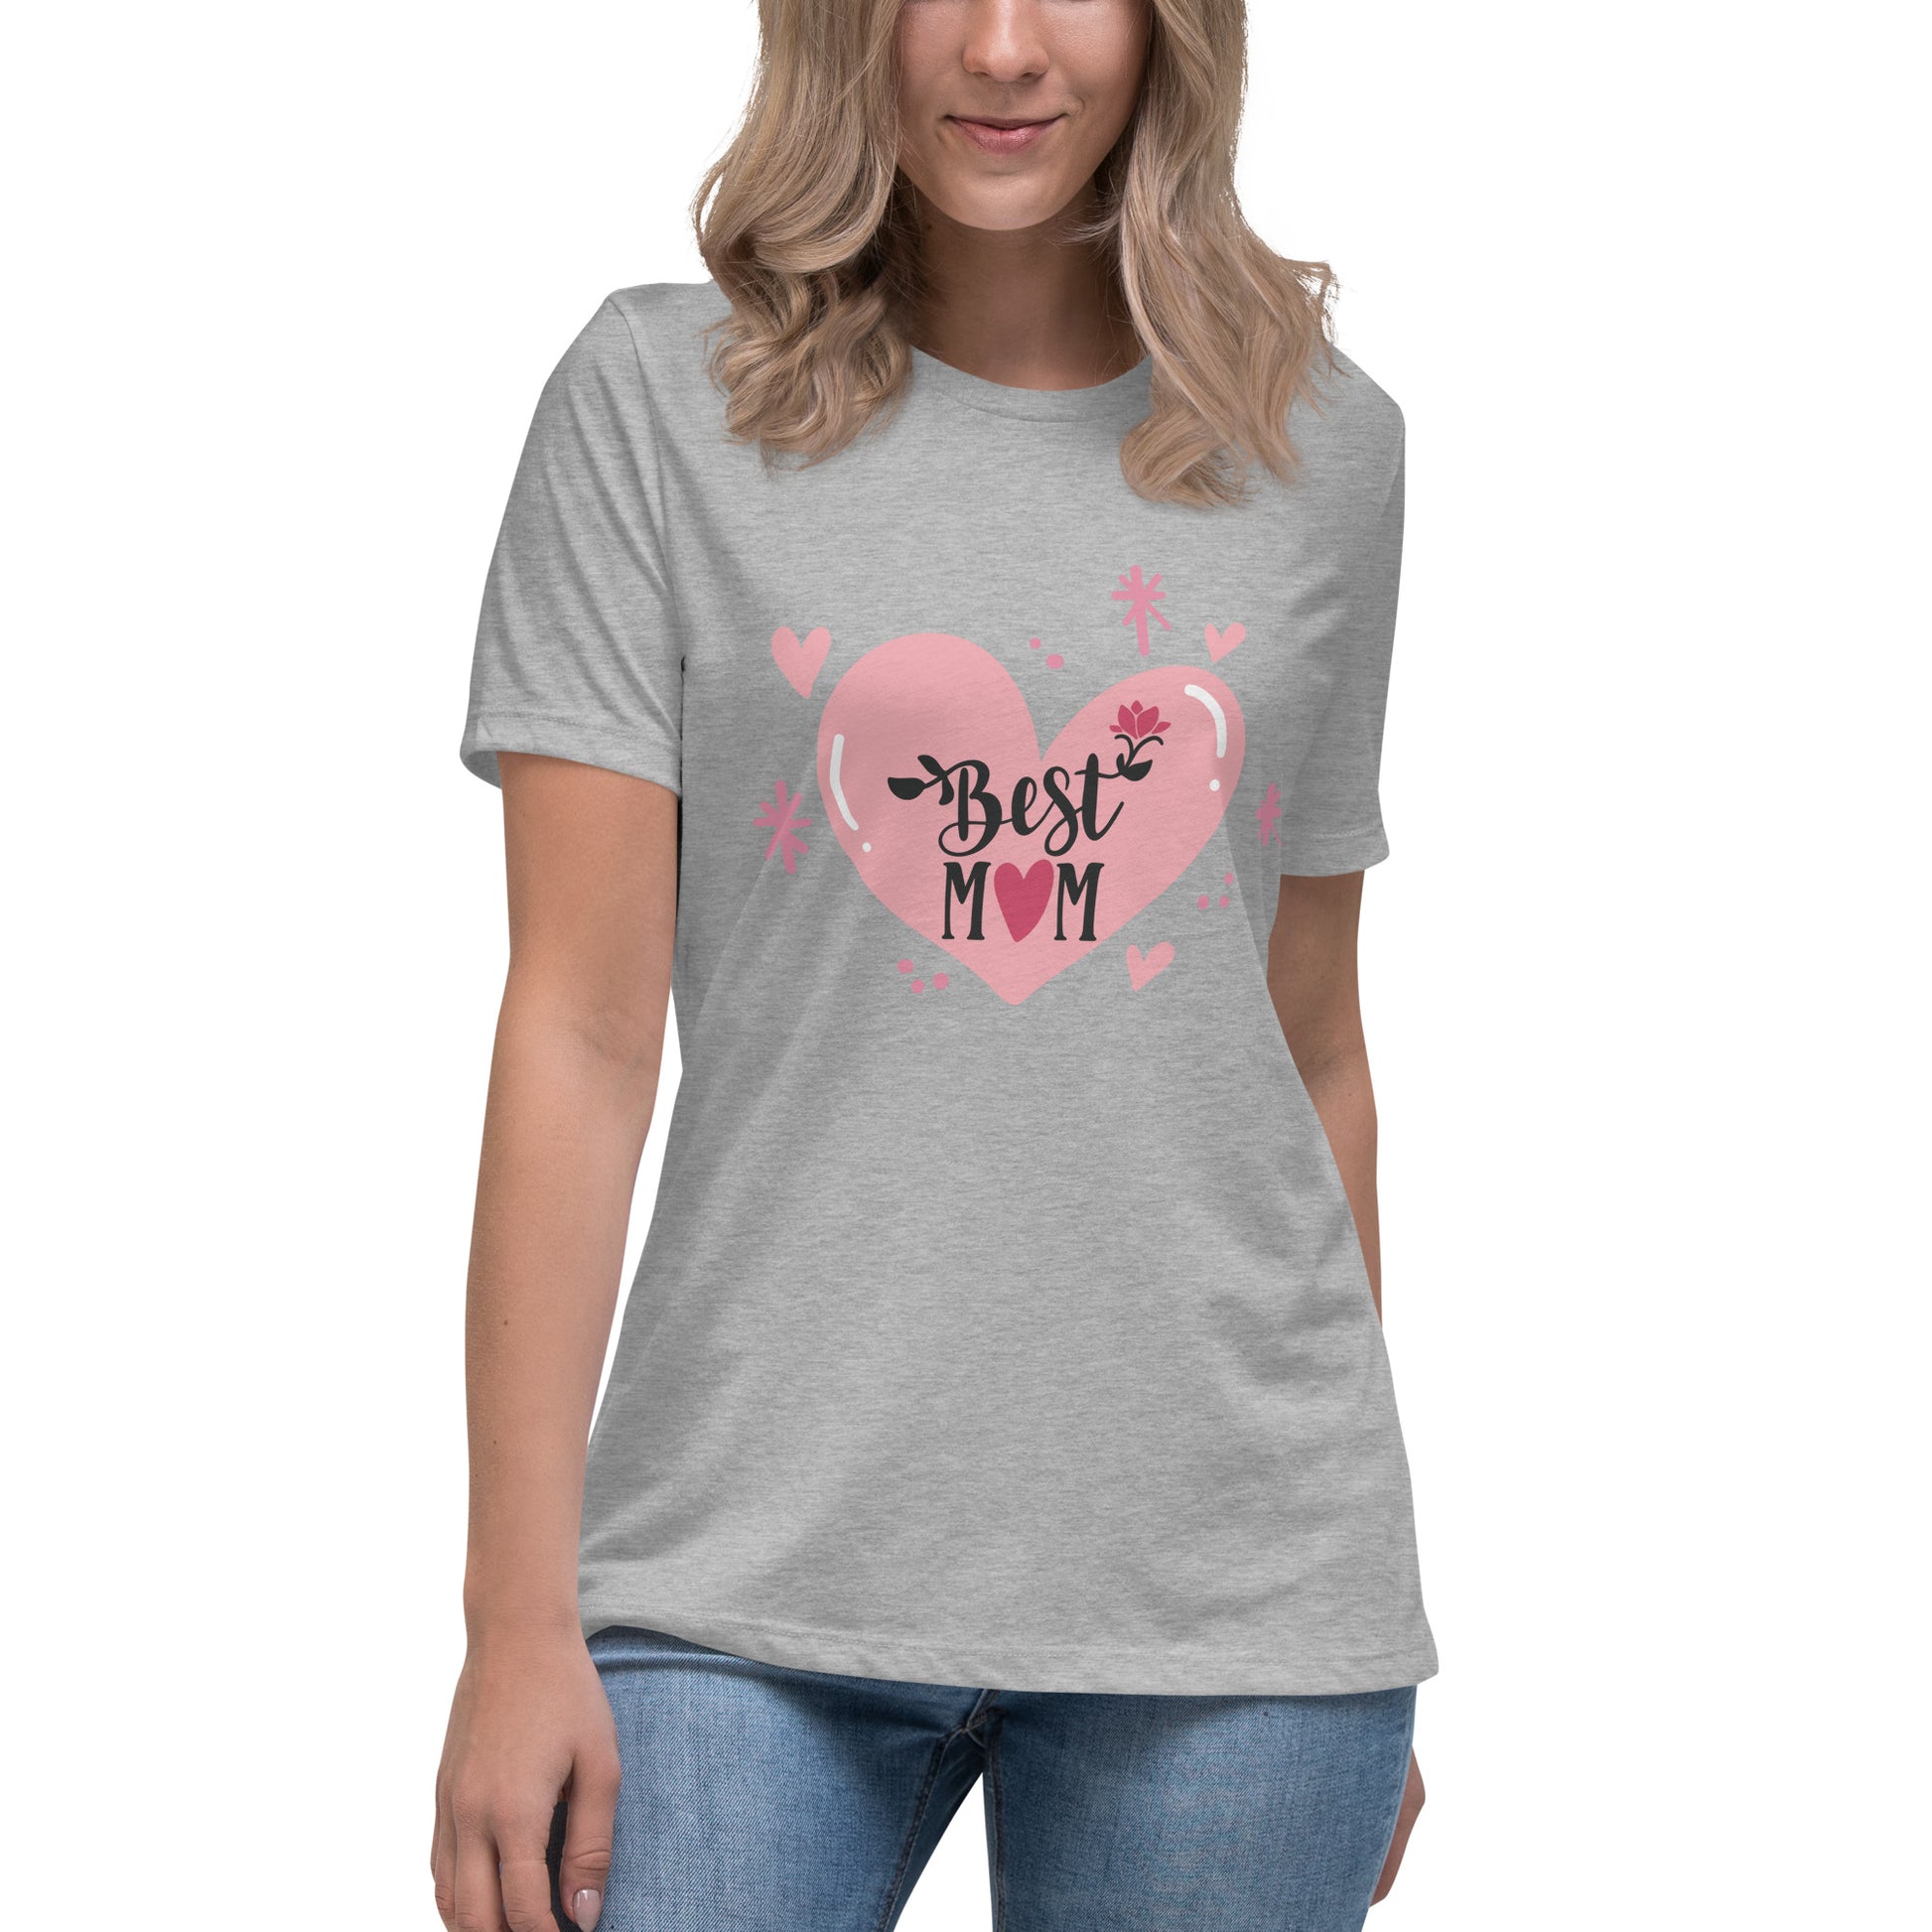 Women with grey t shirt with hart and text best MOM